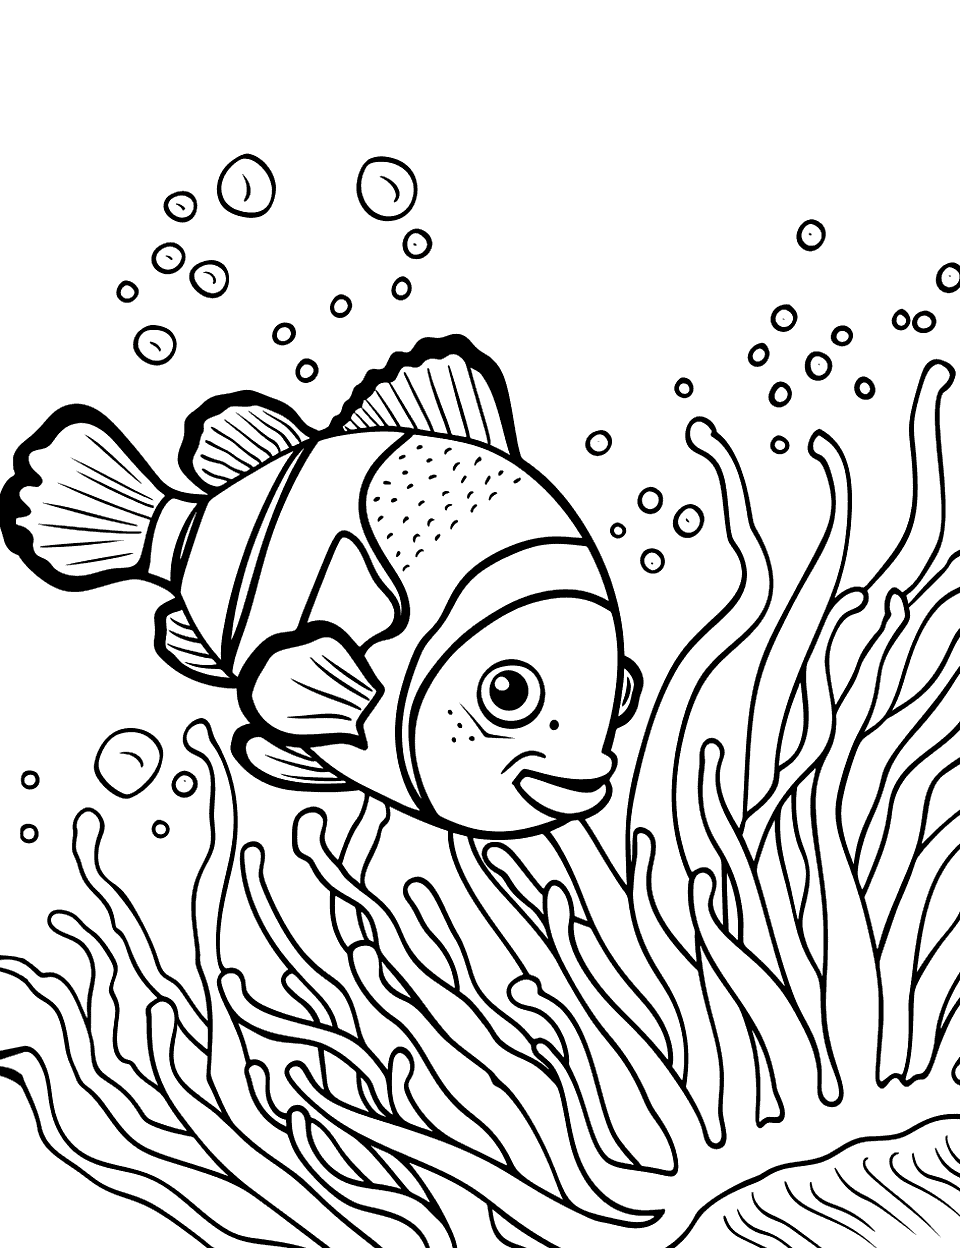 Clownfish Peeking from Anemone Sea Creature Coloring Page - A curious clownfish peers out of a sea anemone’s tentacles, observing the underwater world.